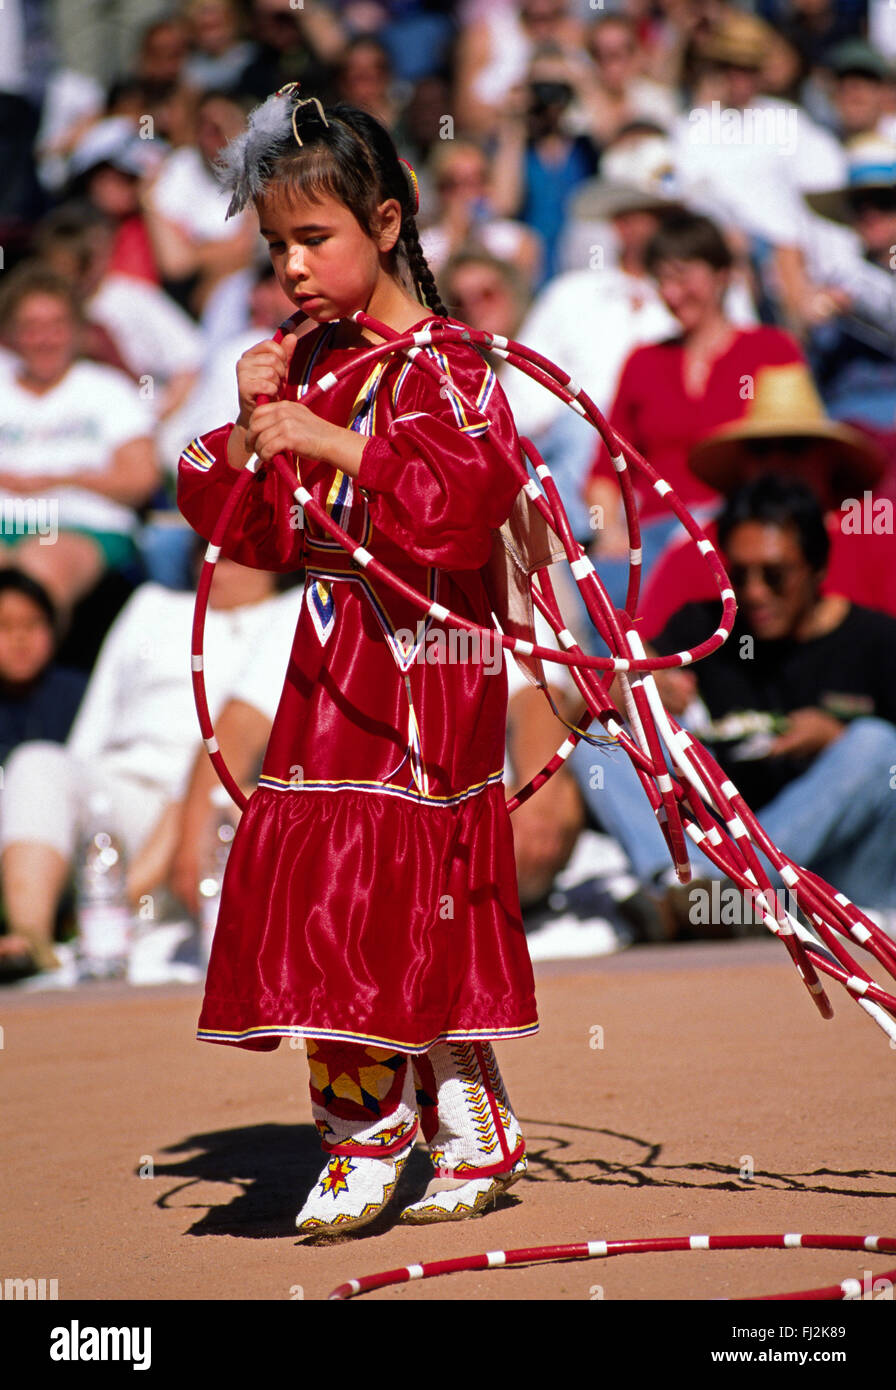 A NATIVE AMERICAN girl competes at the WORLD CHAMPIONSHIP HOOP DANCE CONTEST - PHOENIX, ARIZONA Stock Photo